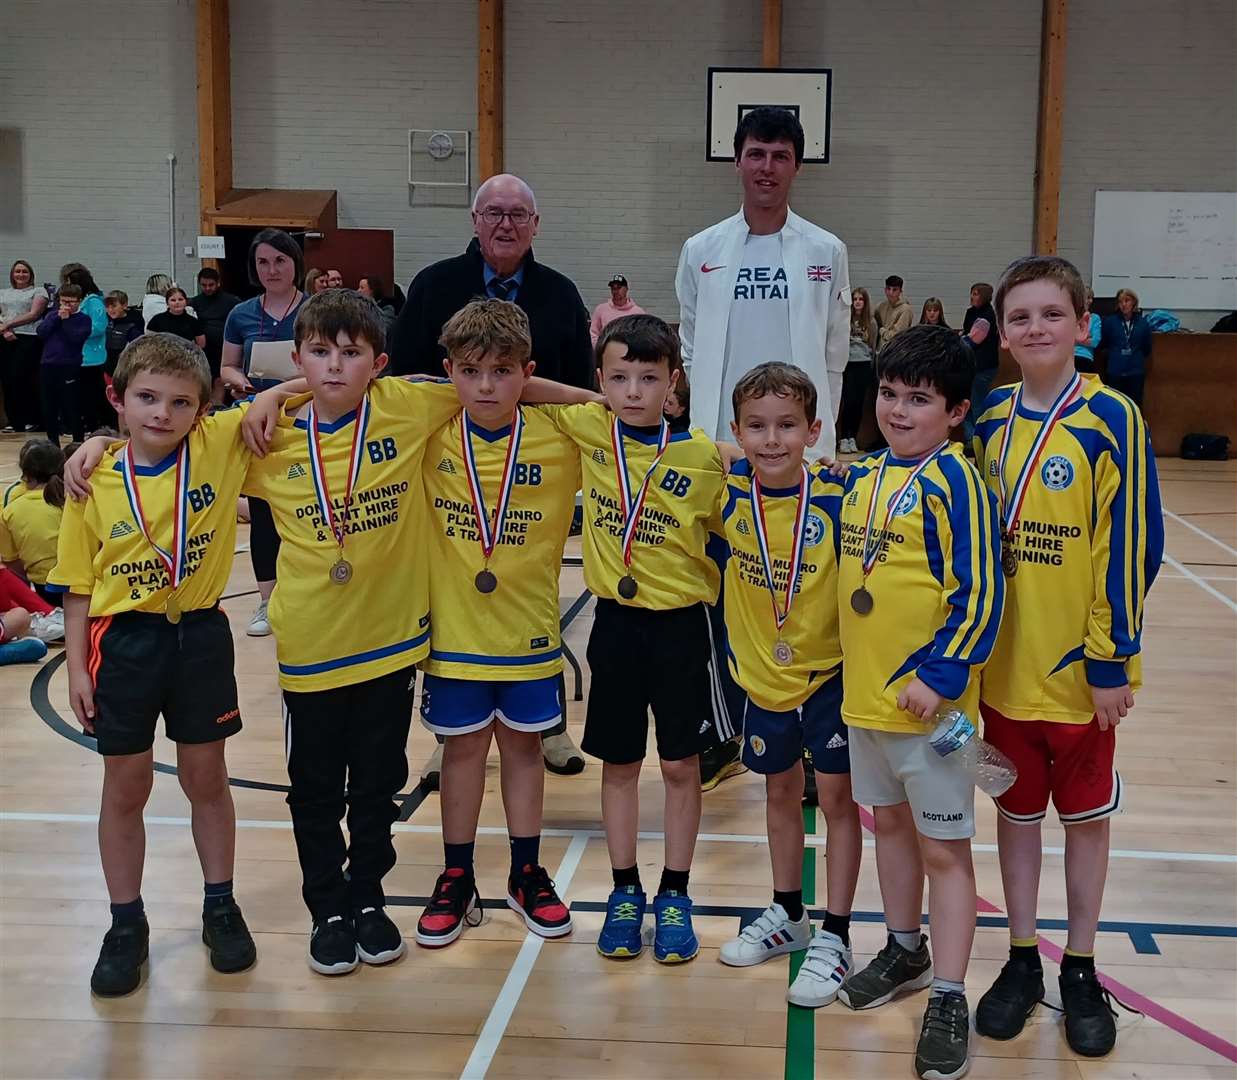 A team from Bonar Bridge were placed second in the boys' Small Schools category.